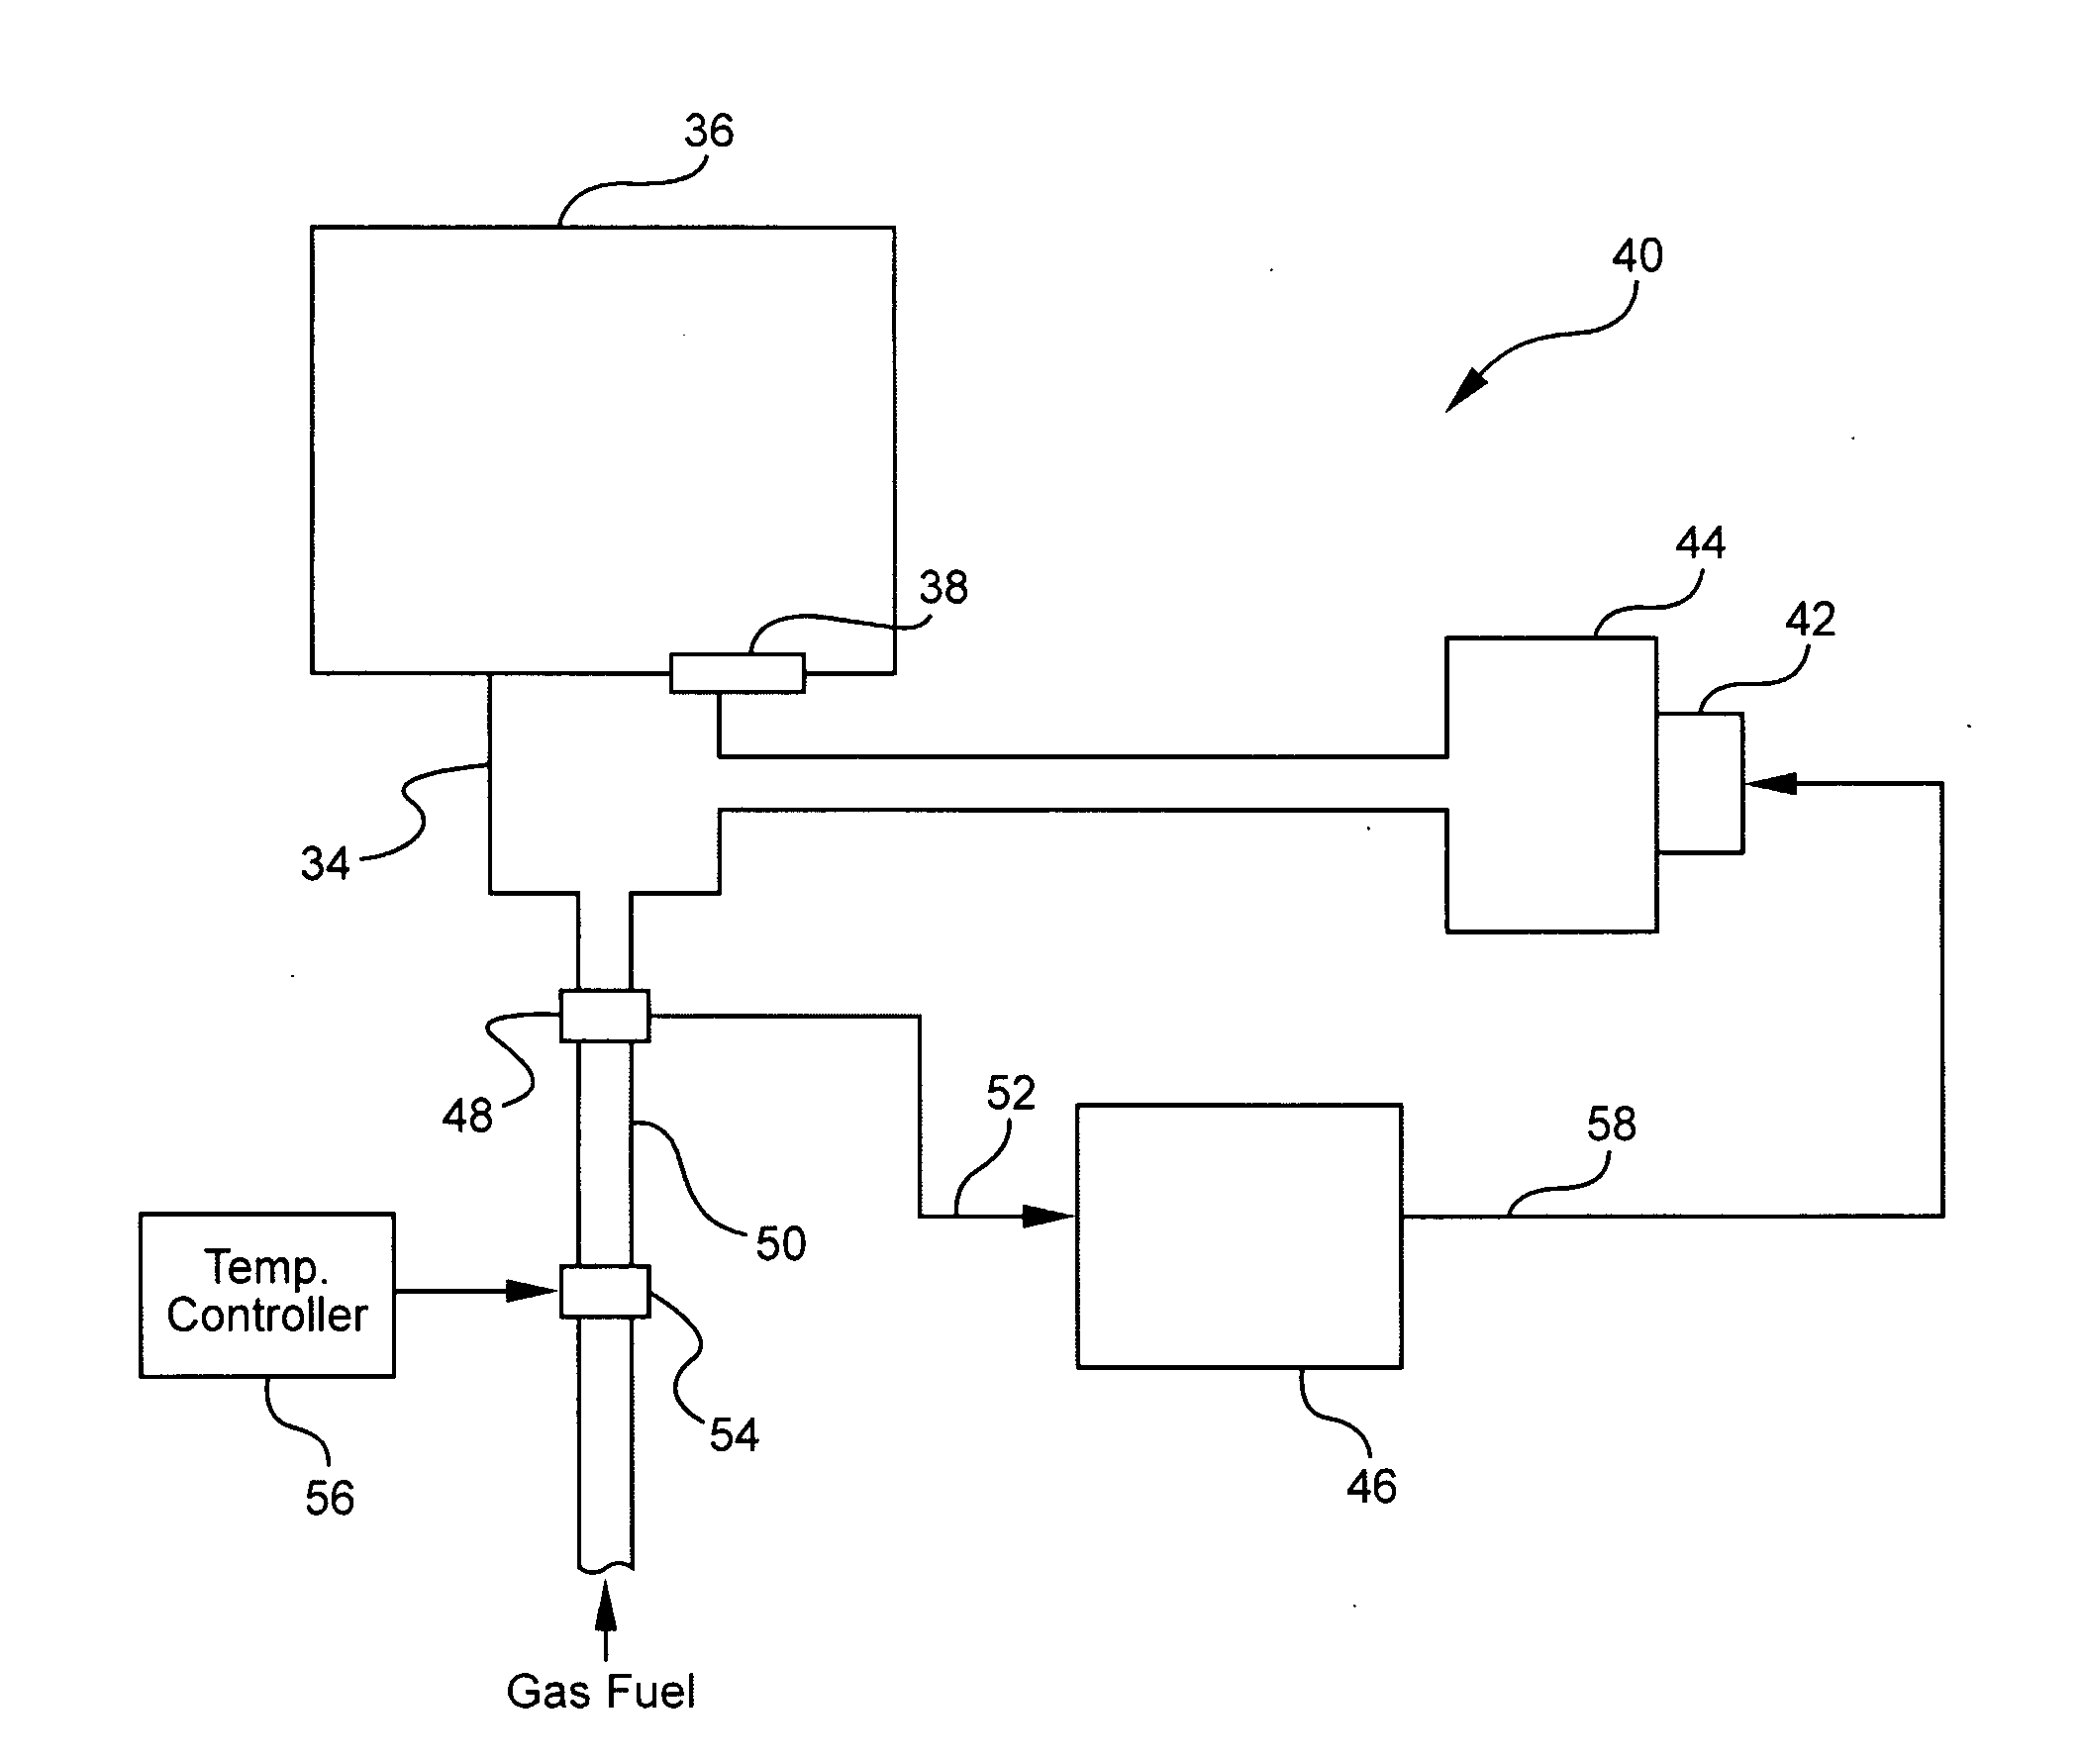 System and method for combustion-air modulation of a gas-fired heating system